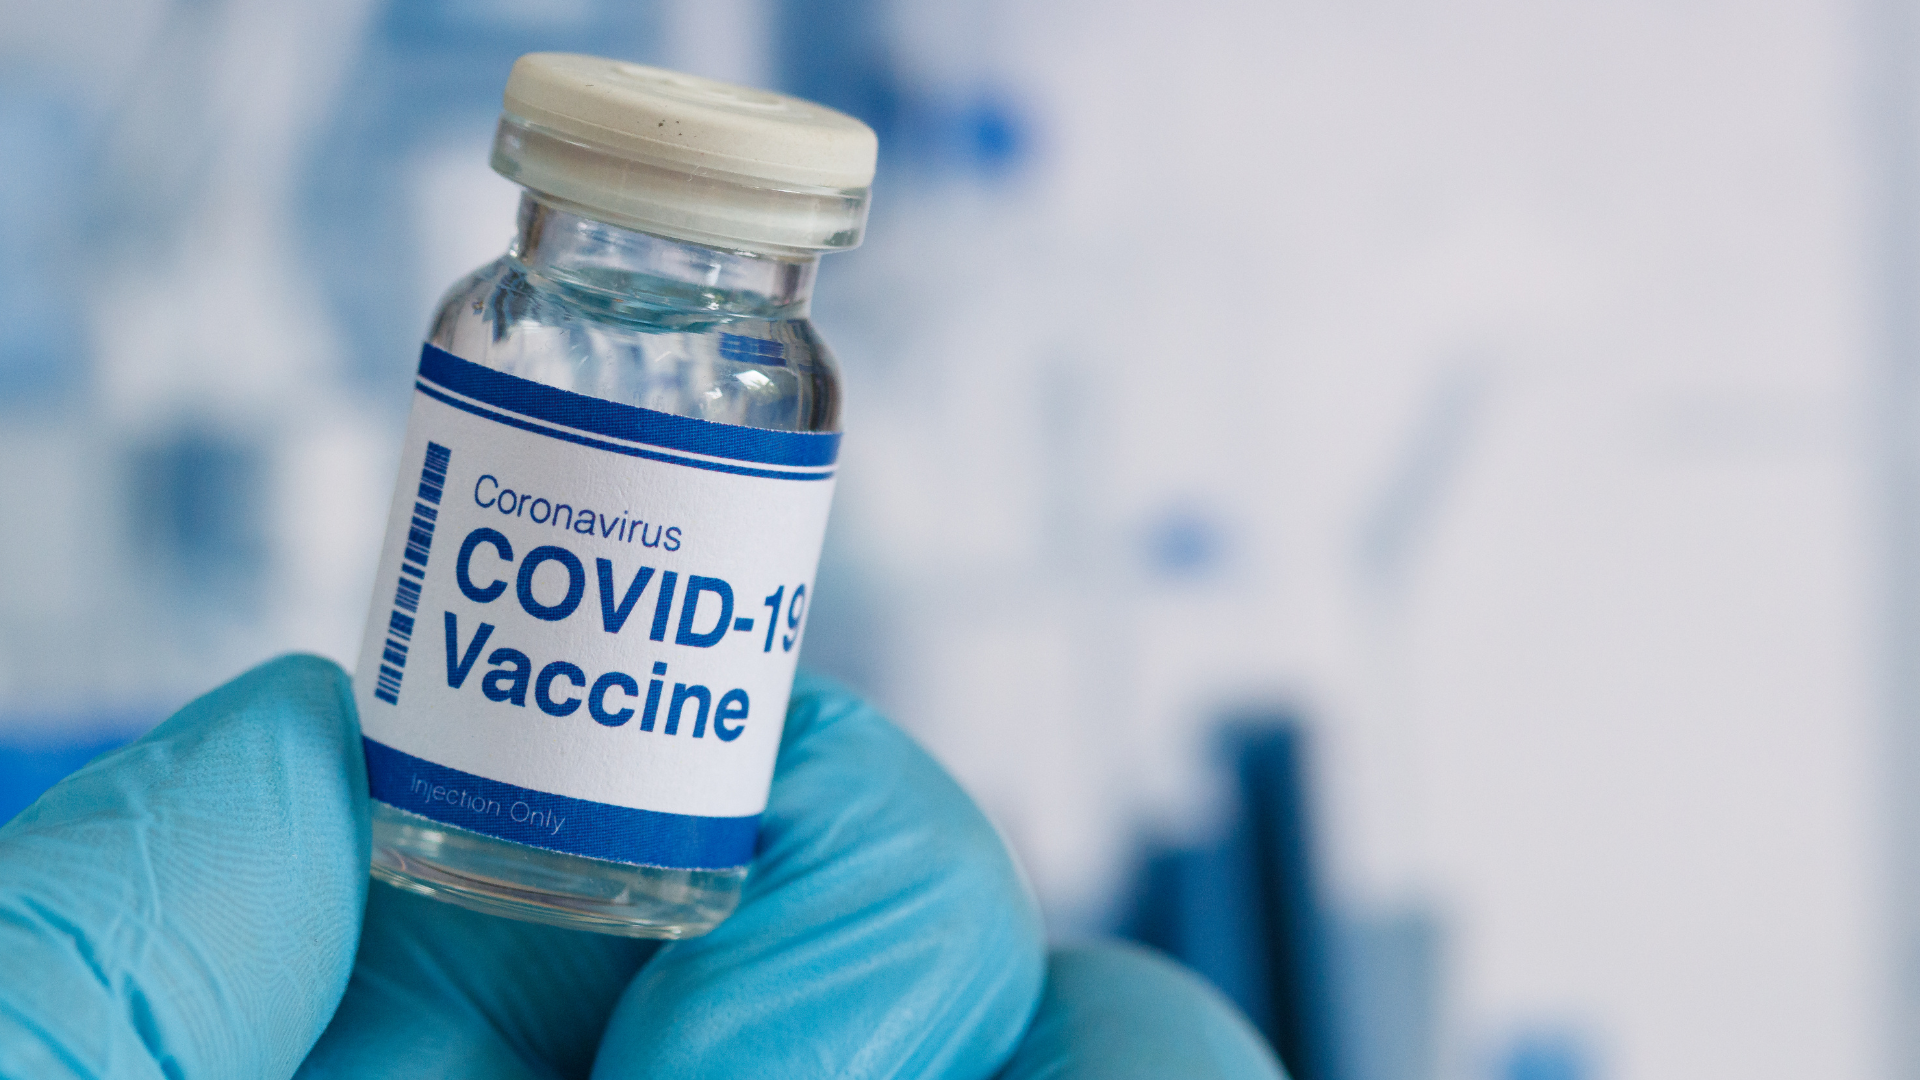 Covid vaccine from public health emergency